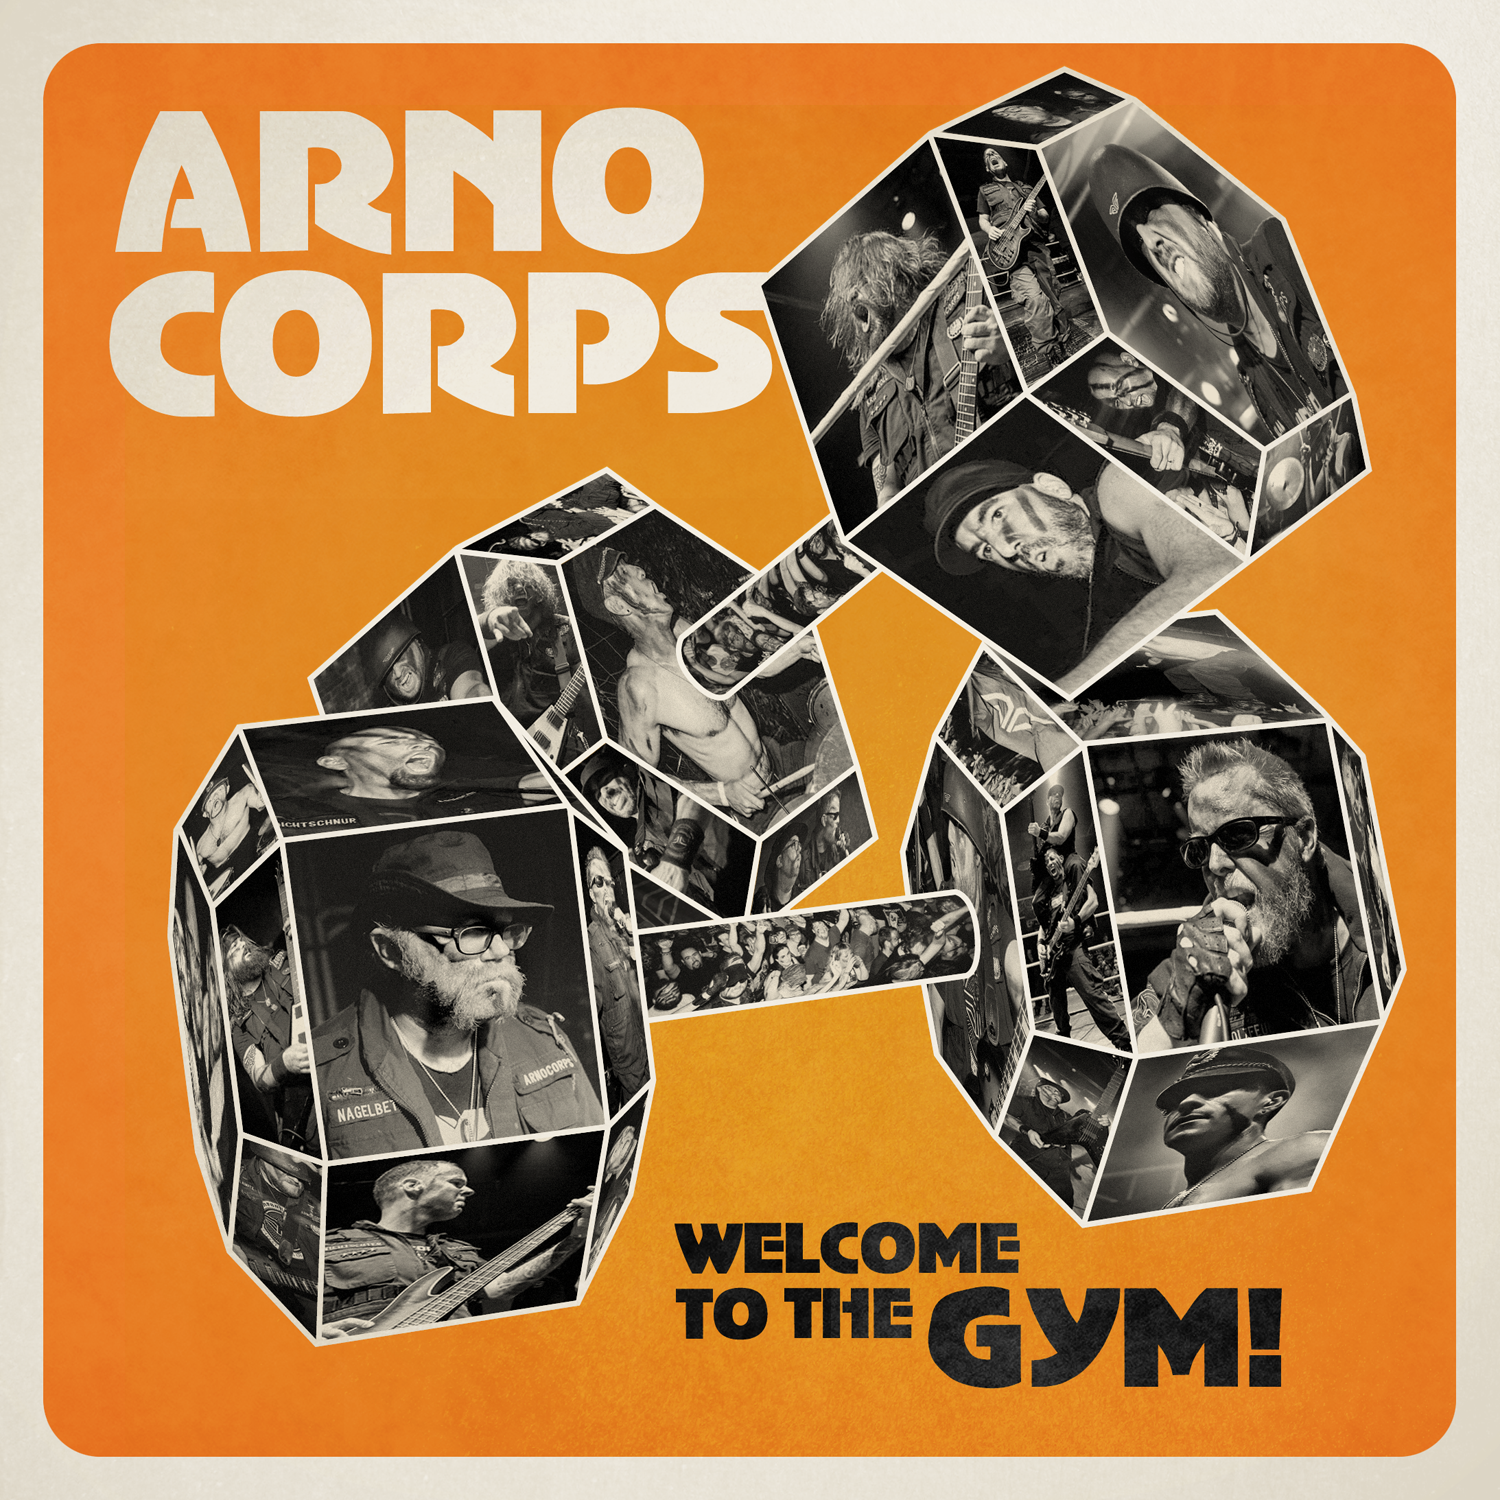 ARNOCORPS ANNOUNCE NEW 7" "WELCOME TO THE GYM"